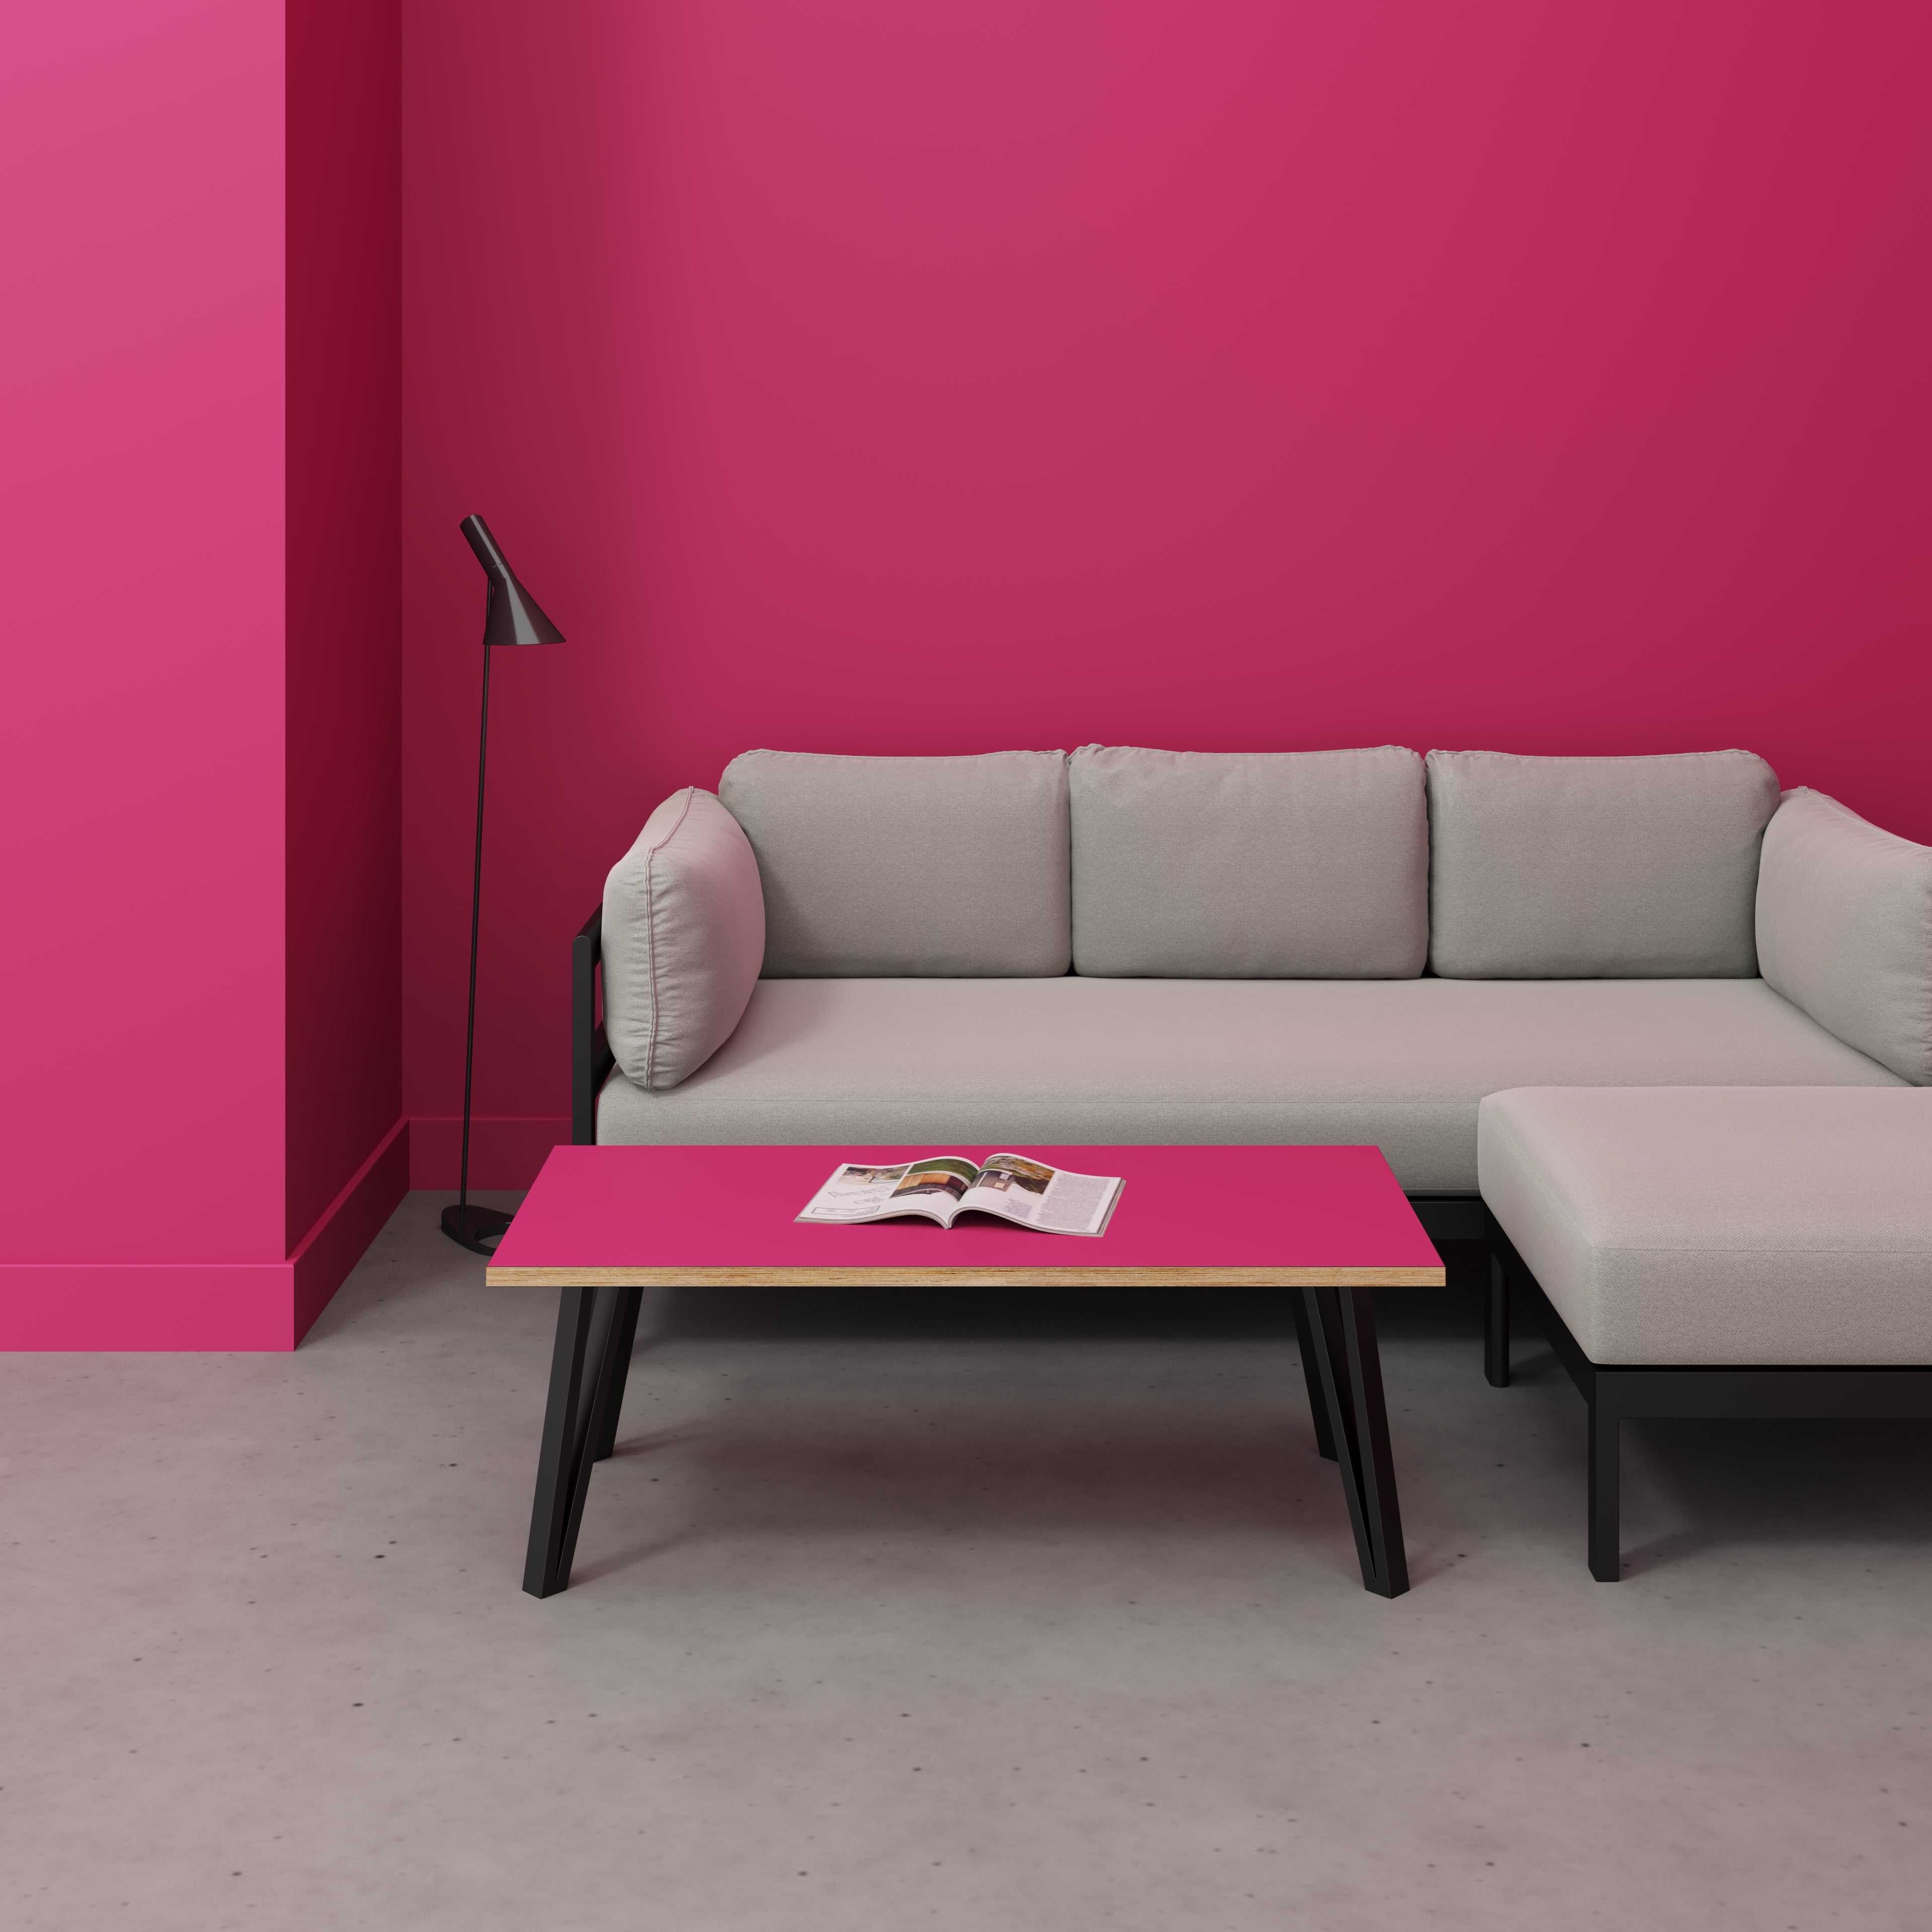 Coffee Table with Black Box Hairpin Legs - Formica Juicy Pink - 1200(w) x 600(d) x 425(h)